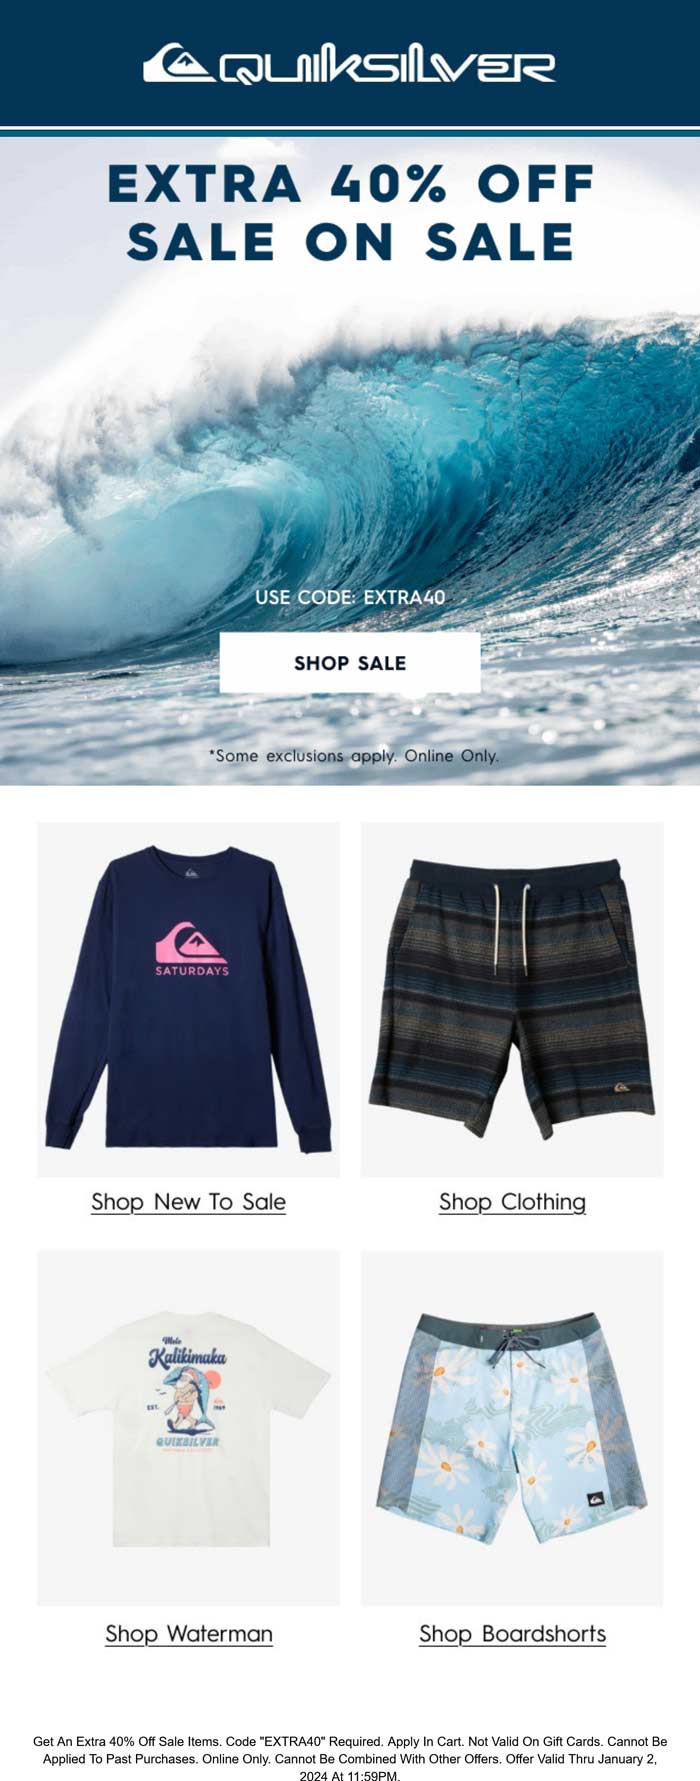 Quiksilver stores Coupon  Extra 40% off sale items at Quiksilver via promo code EXTRA40 #quiksilver 